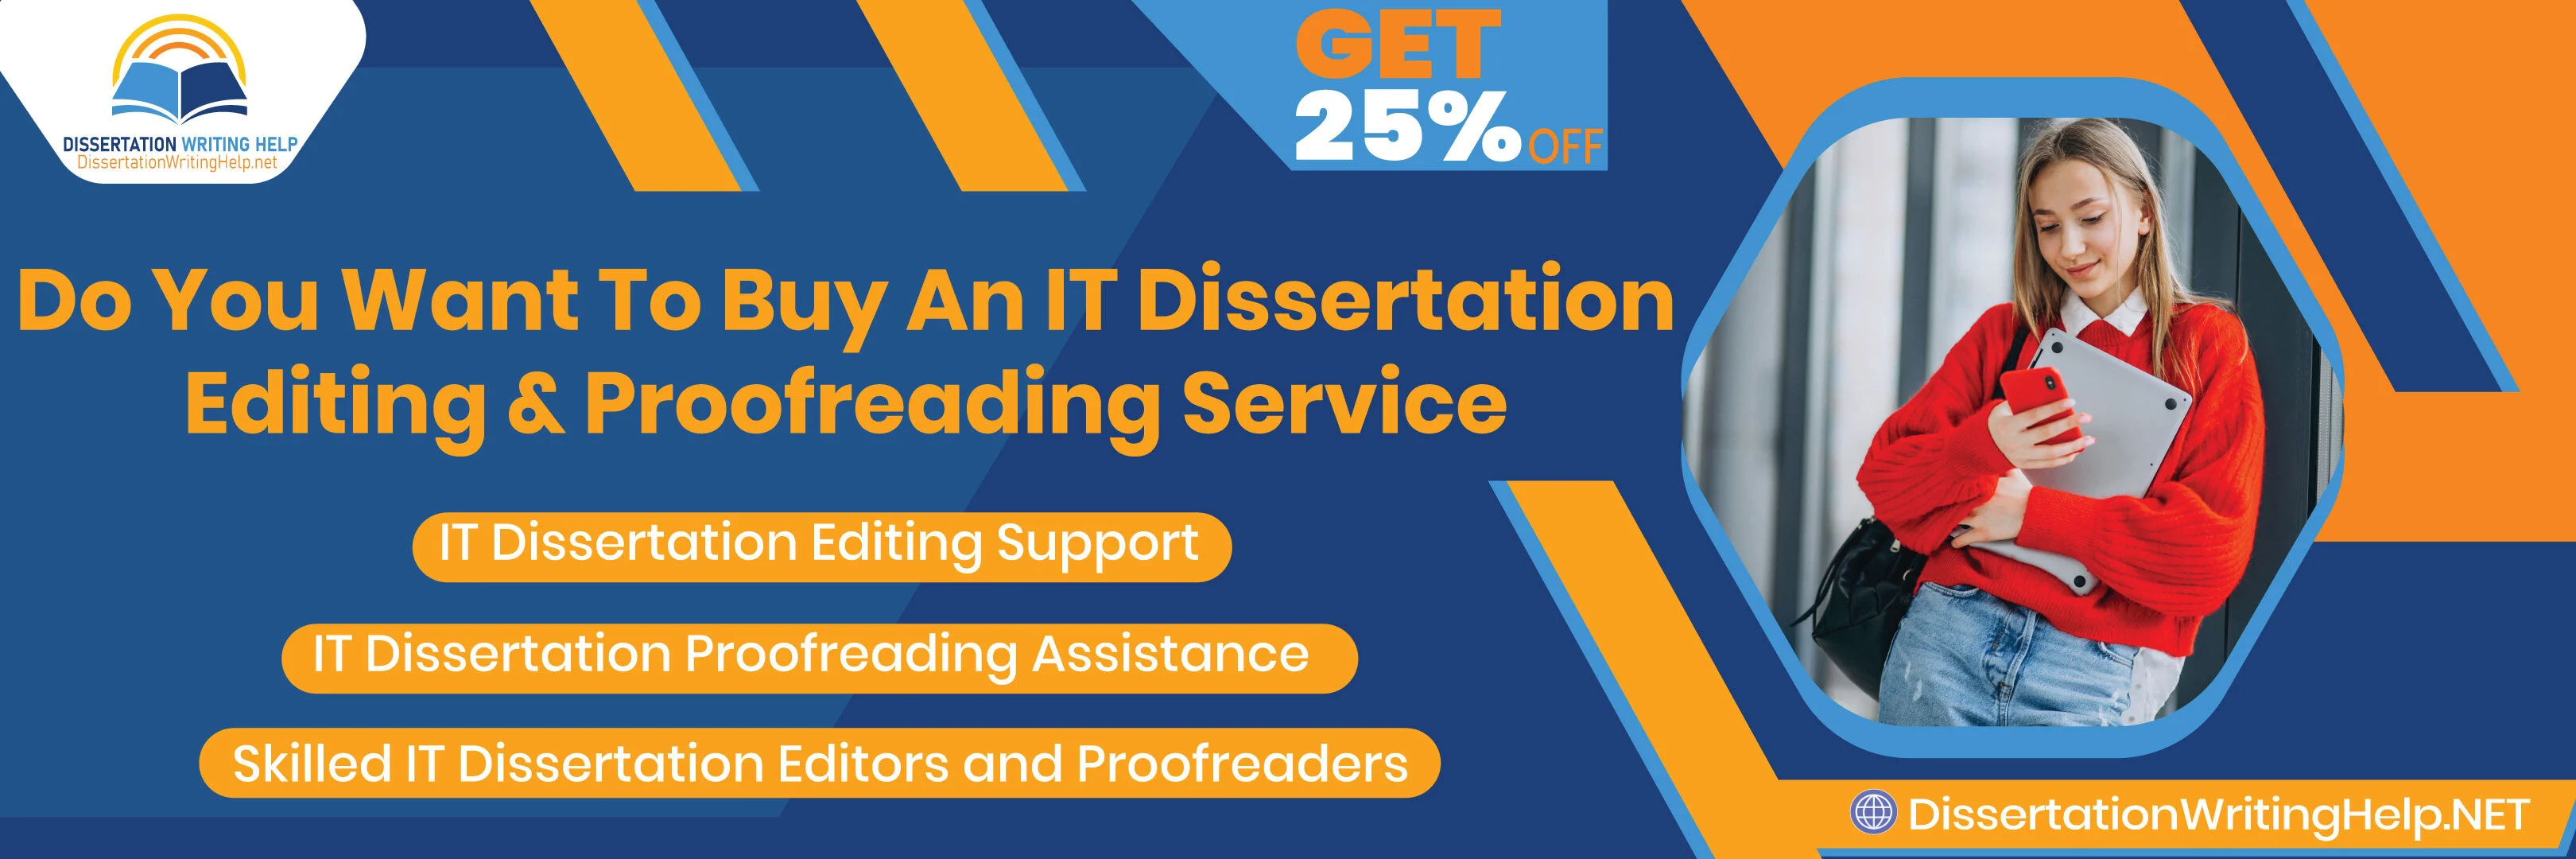 it-dissertation-editing-and-proofreading-services